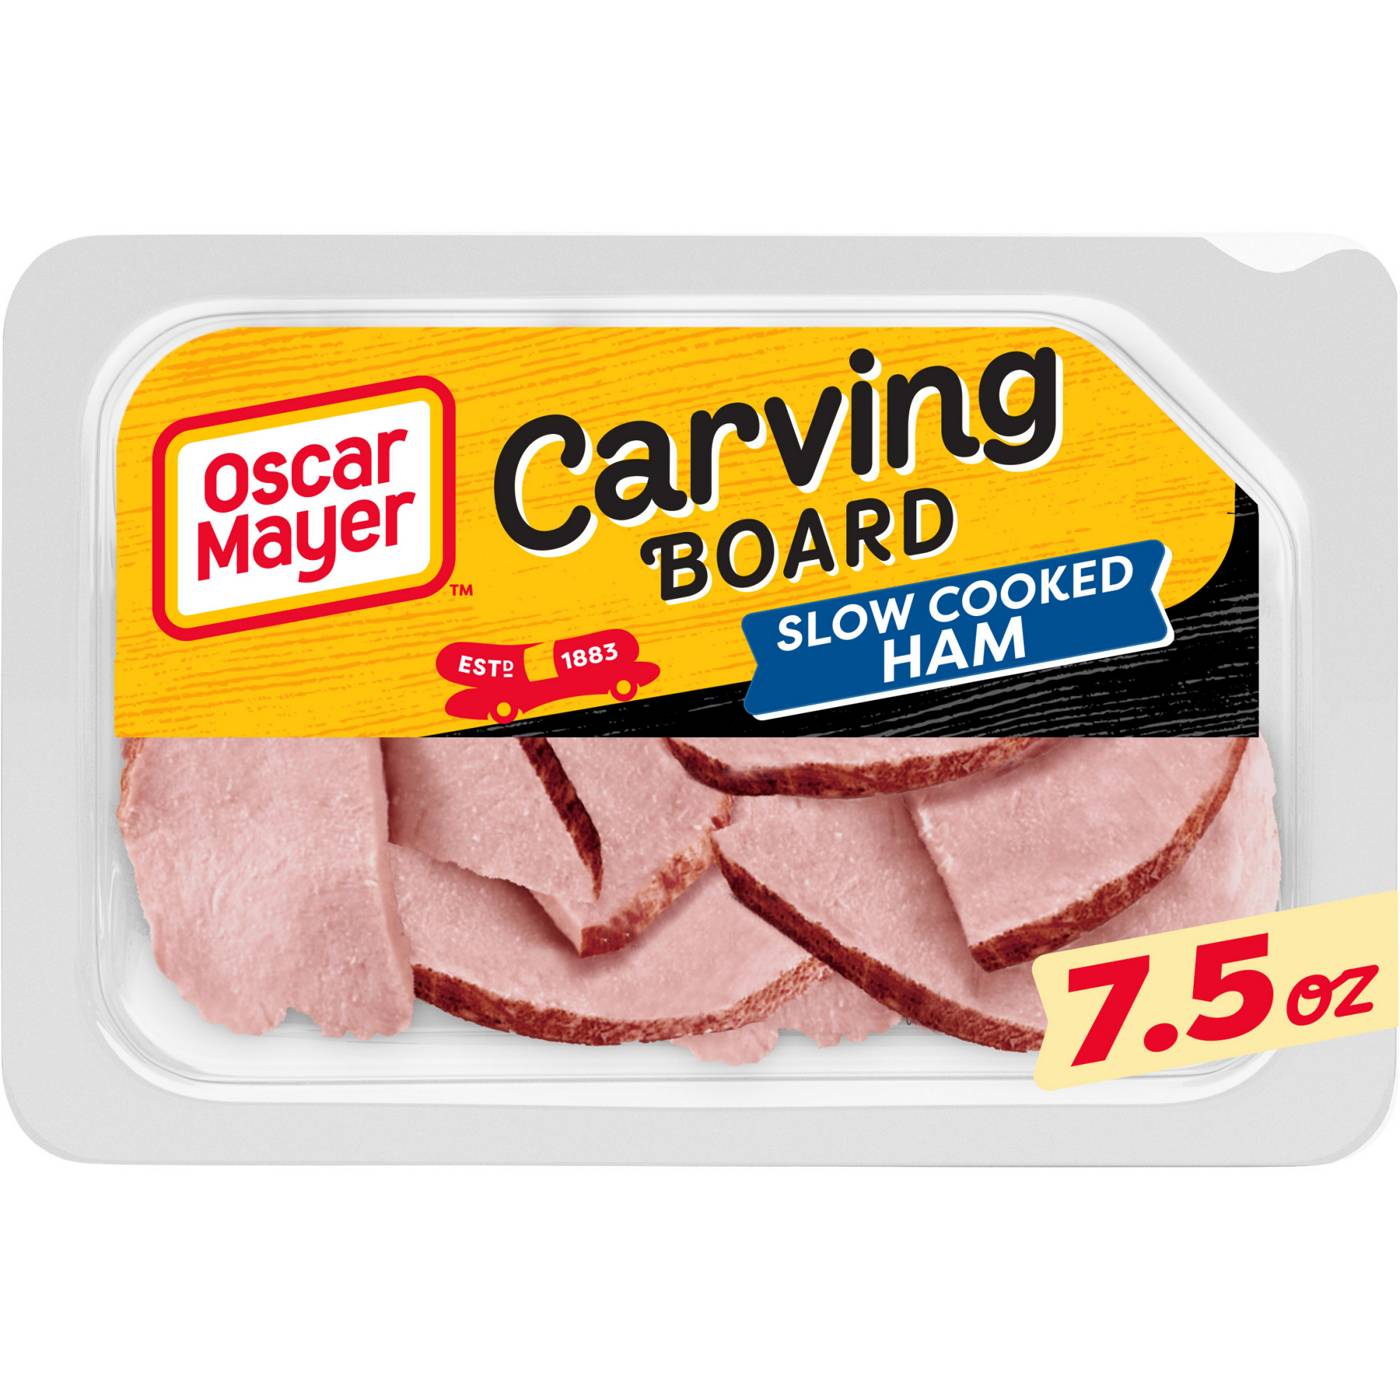 Oscar Mayer Carving Board Slow Cooked Ham Sliced Lunch Meat; image 1 of 6